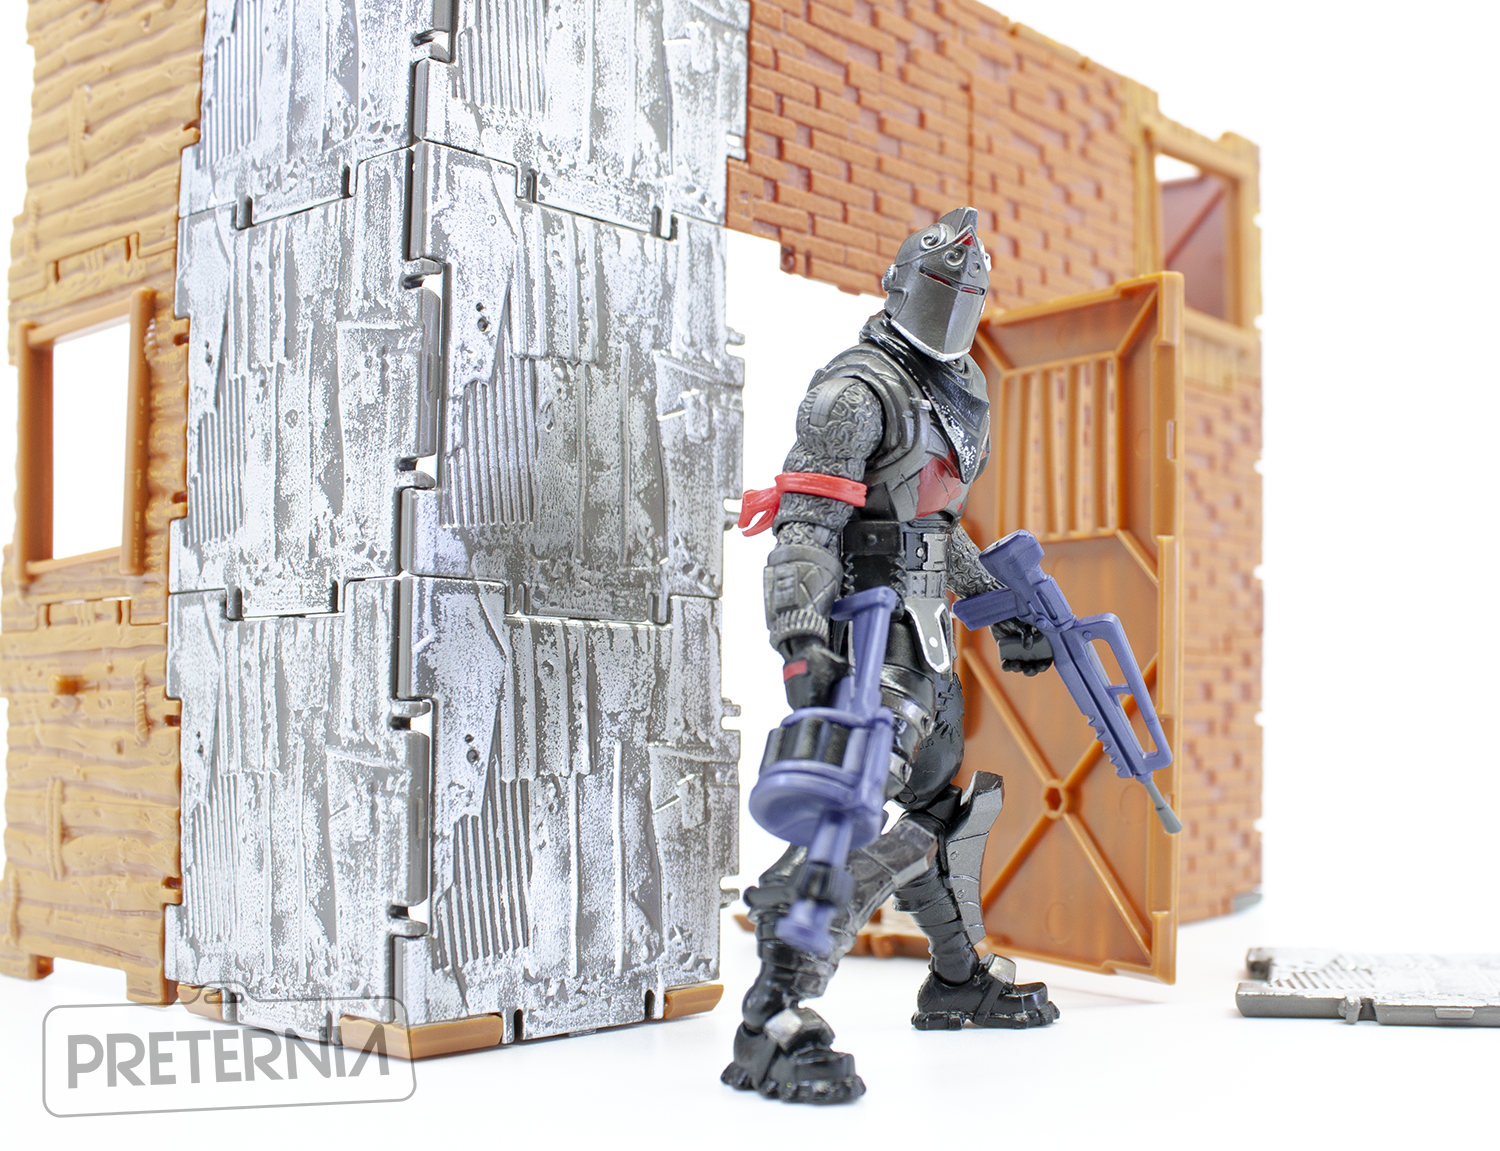 NEW Jazwares 100% Official Fortnite Series 2 Black Knight 1 By 1 Builder Set 